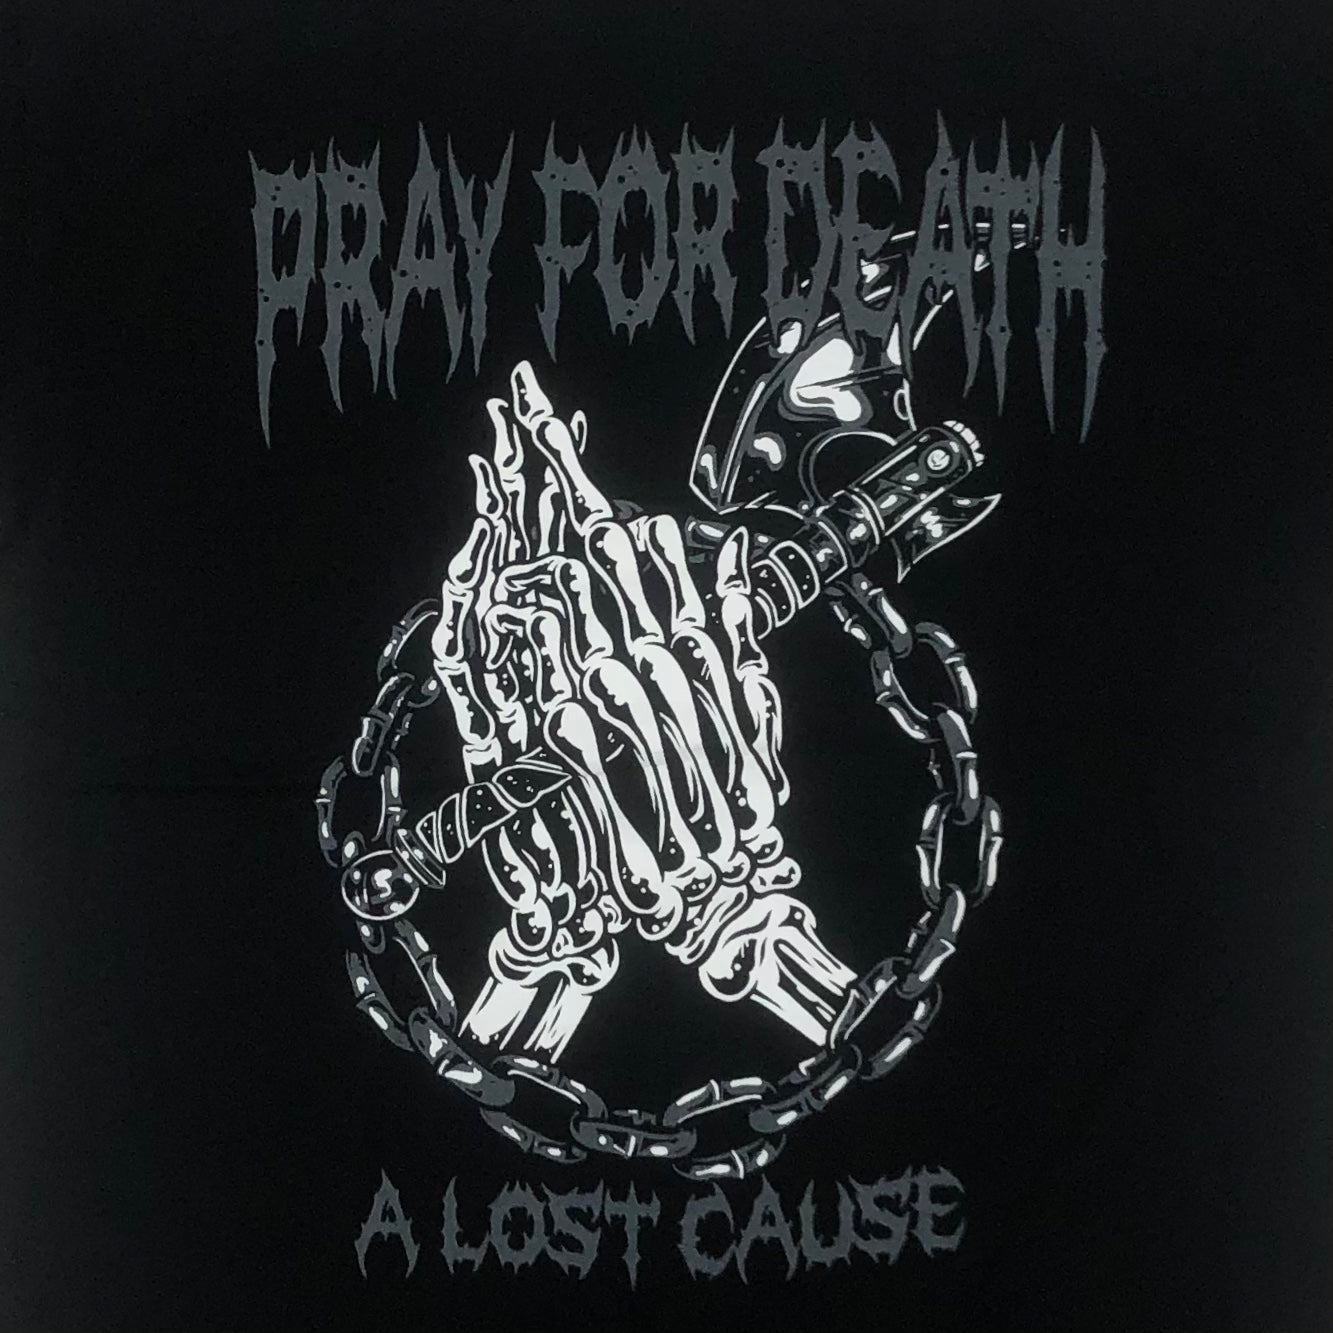 A LOST CAUSE Pray Graphic T-Shirt